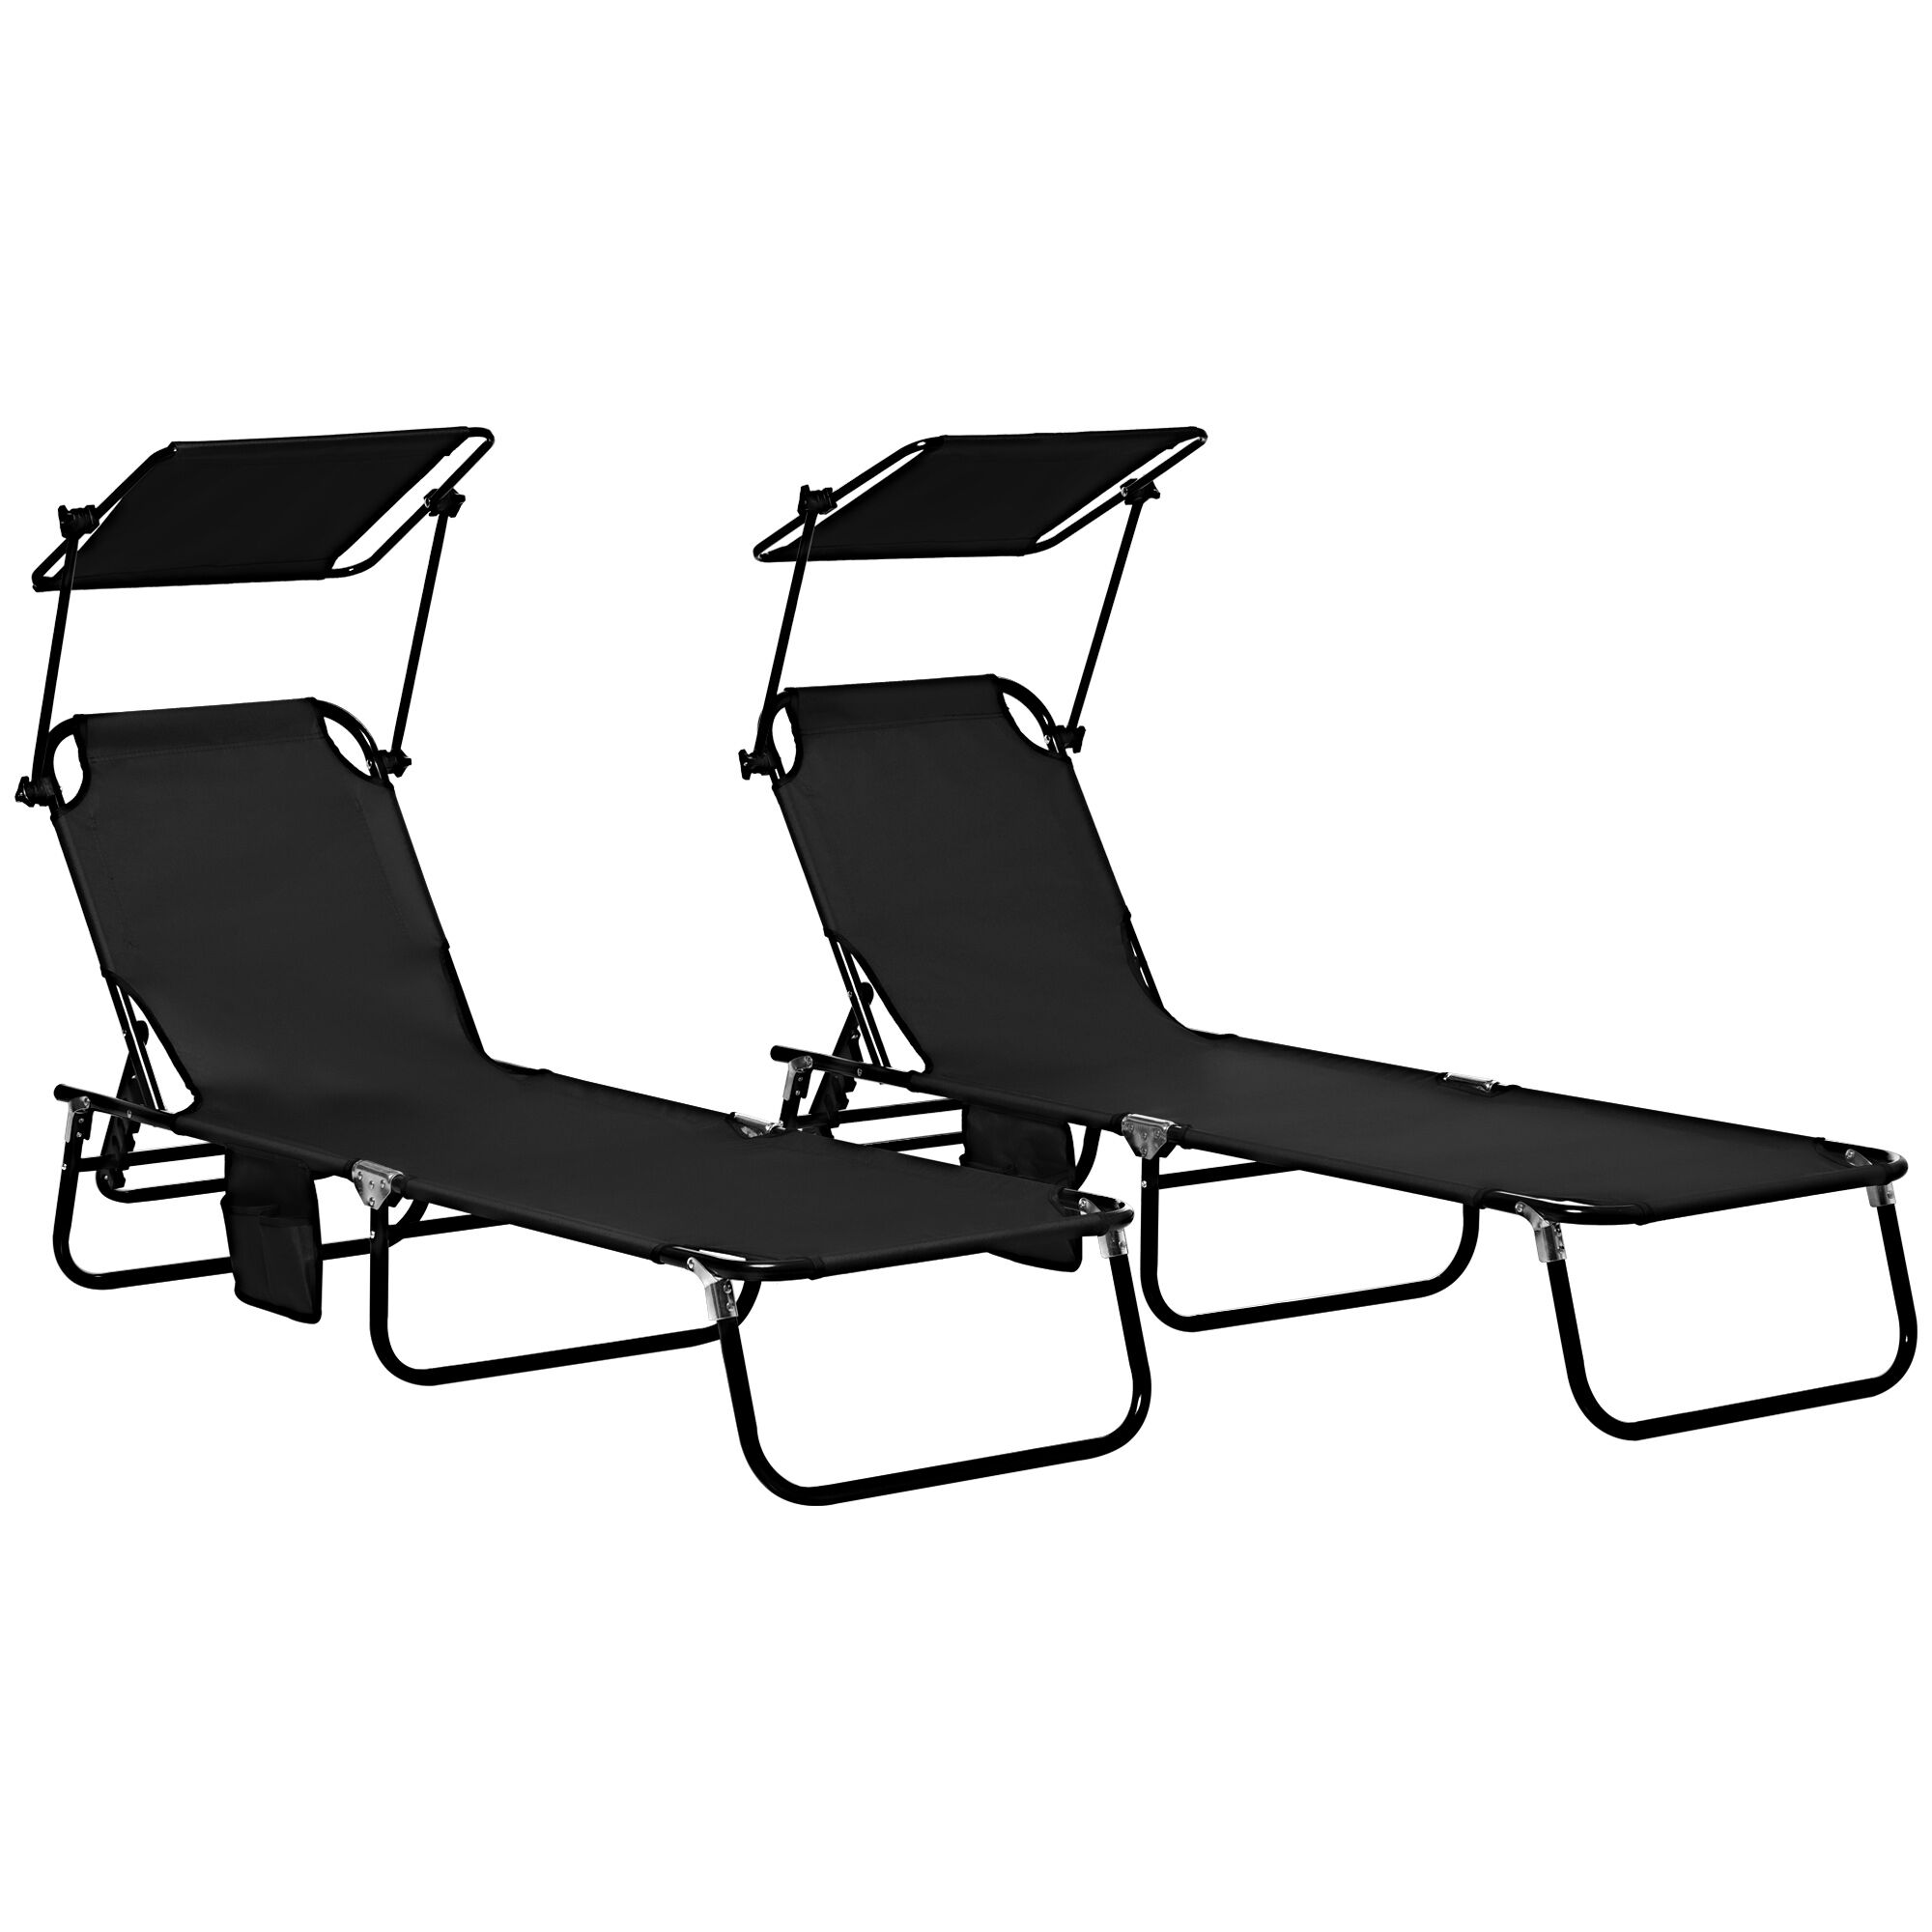 Outsunny Set of 2 Folding Chaise Lounge Chairs Black with Sunshade 5-Position Recline Steel Frame Oxford Fabric for Beach Yard Patio   Aosom.com